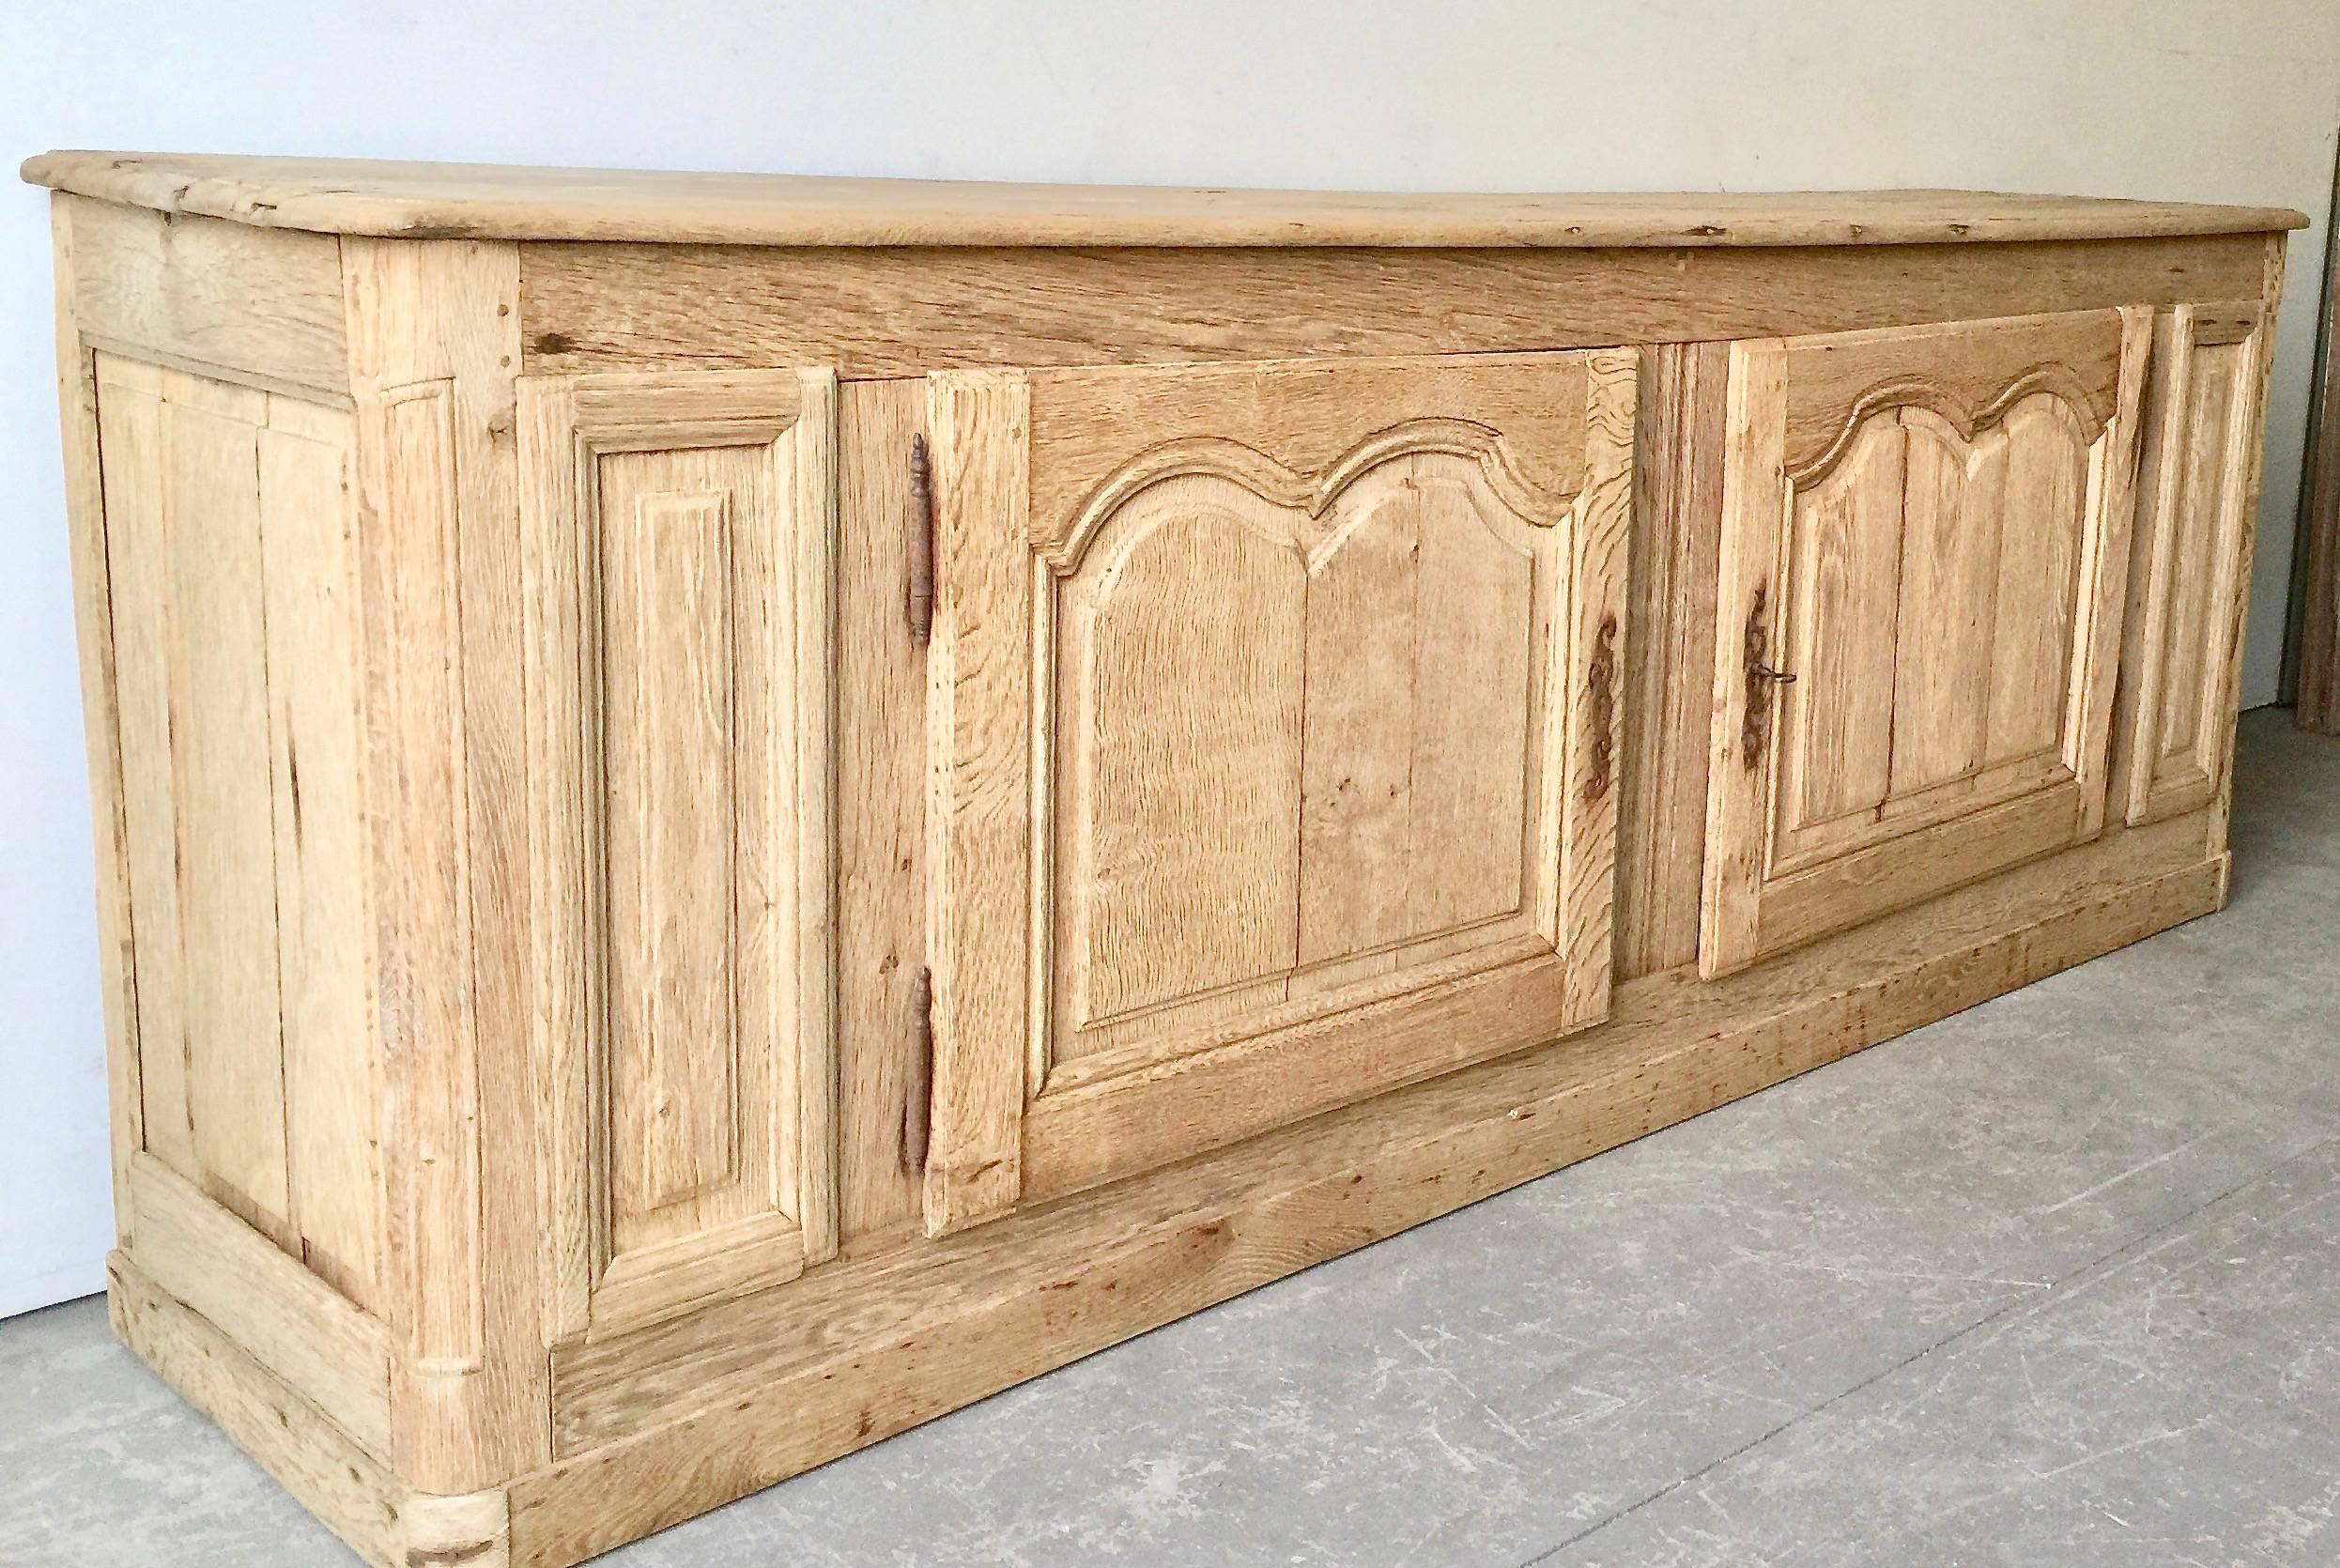 Handsome, long 19th century French sideboard, in Louis XV manner with shaped top and two richly carved fielded door panels in superb patinated natural oak. Original rustic ironwork. 
France, 19th century. 
More than ever, we selected the best, the